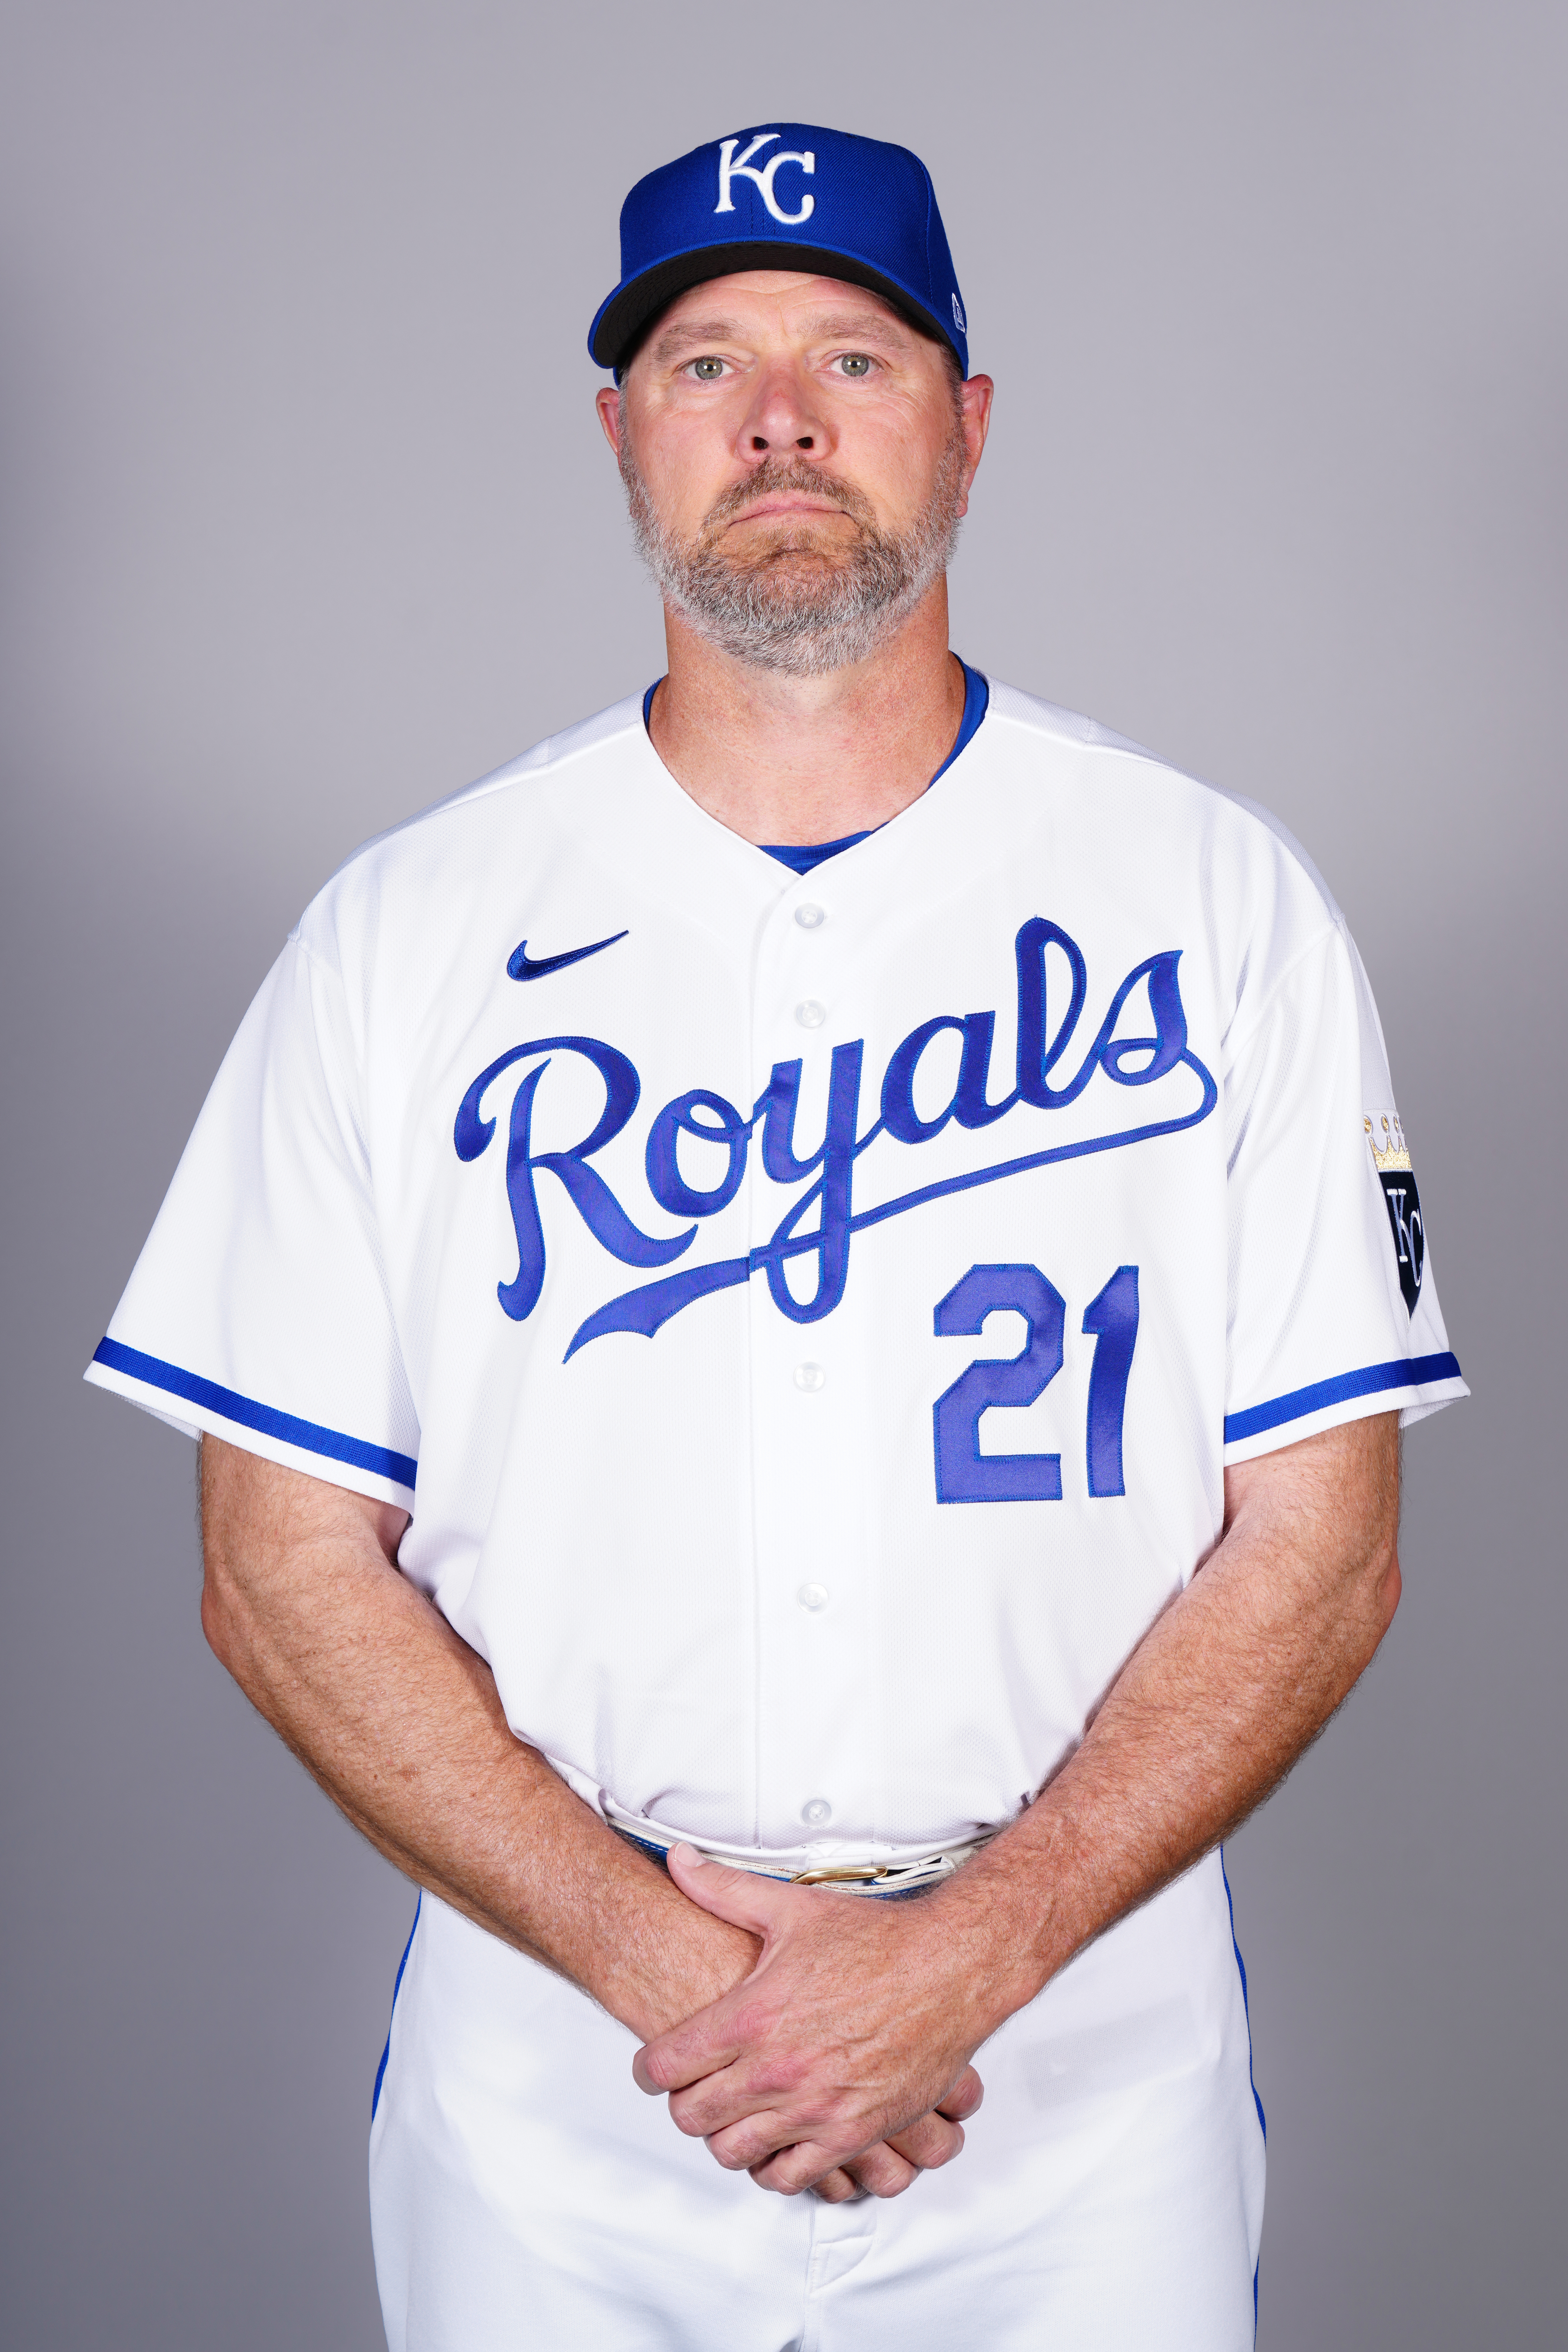 Cal Eldred looks like he’s taking a mug shot or lined up before a firing squad during Kansas City Royals Photo Day